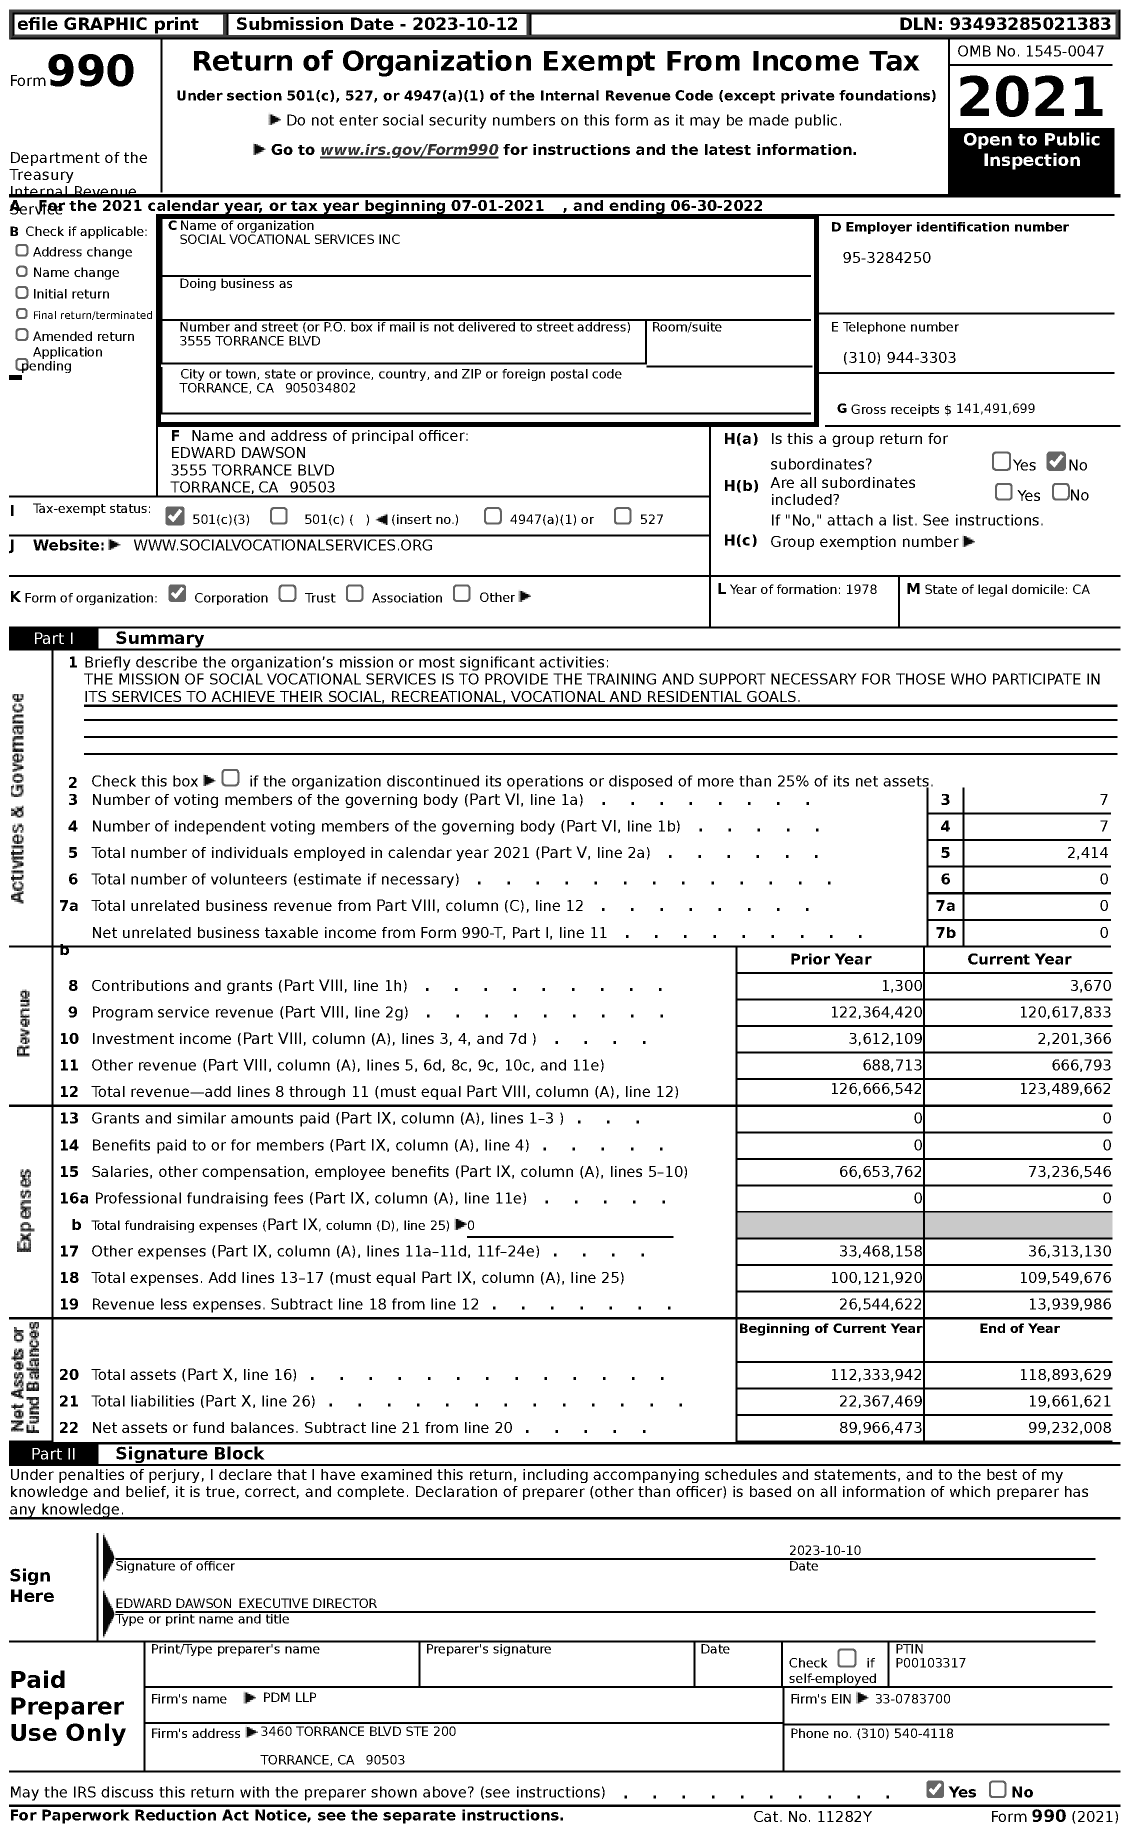 Image of first page of 2021 Form 990 for Social Vocational Services (SVS)